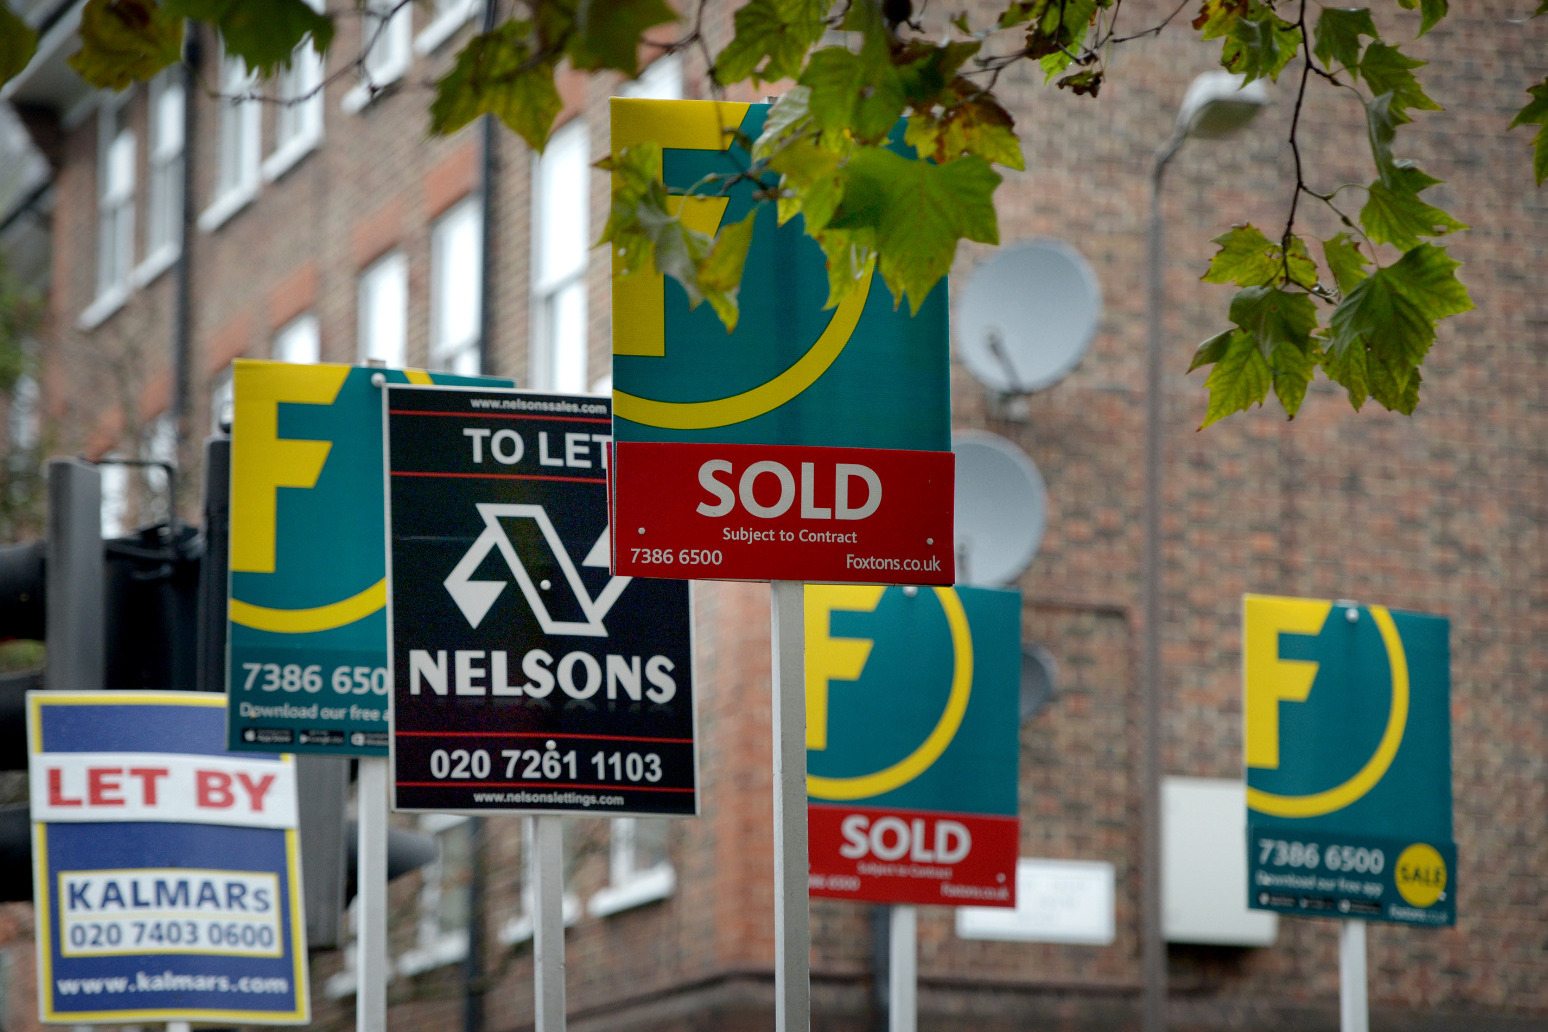 Weakest January for house sales recorded since 2015 